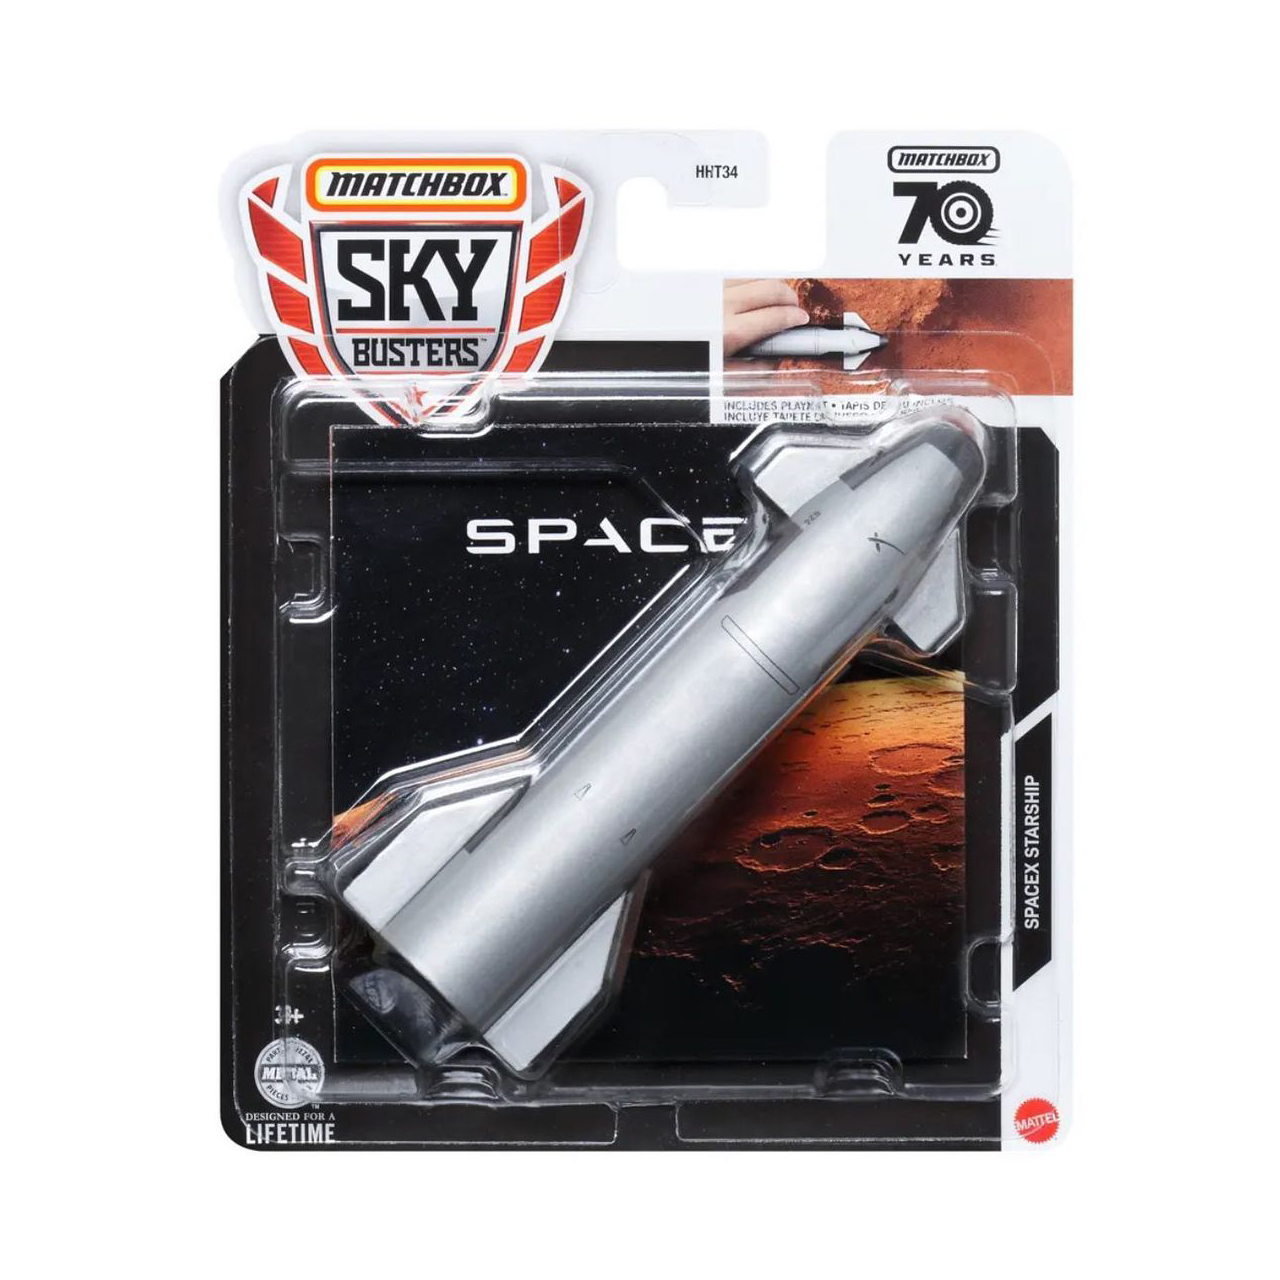 Mattel has released a die-cast toy version of SpaceX's Starship as part of the Matchbox Sky Busters line.